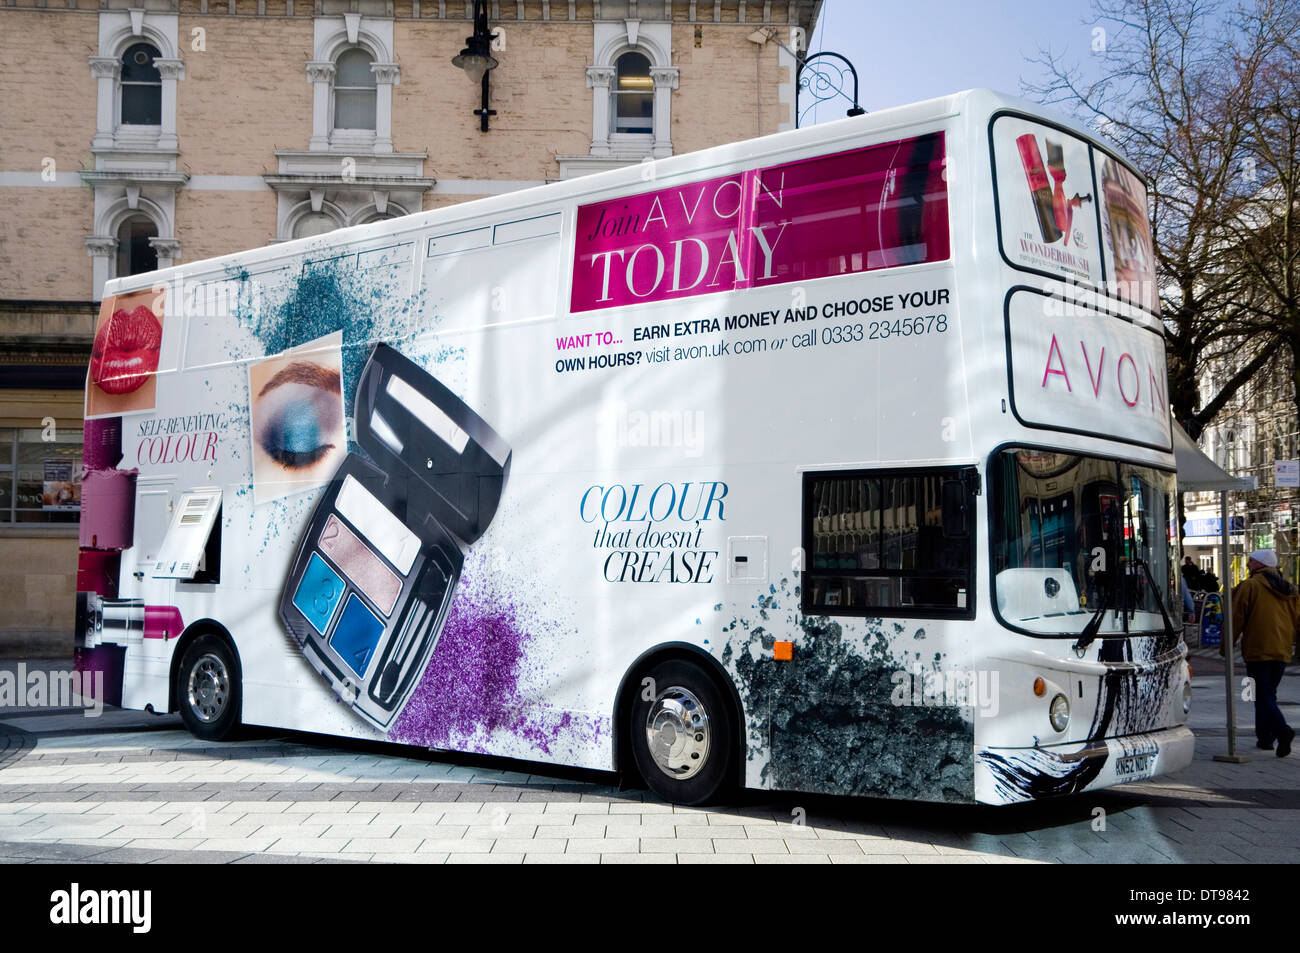 Avon cosmetics touring bus, Queen Street, Cardiff, Wales. Stock Photo